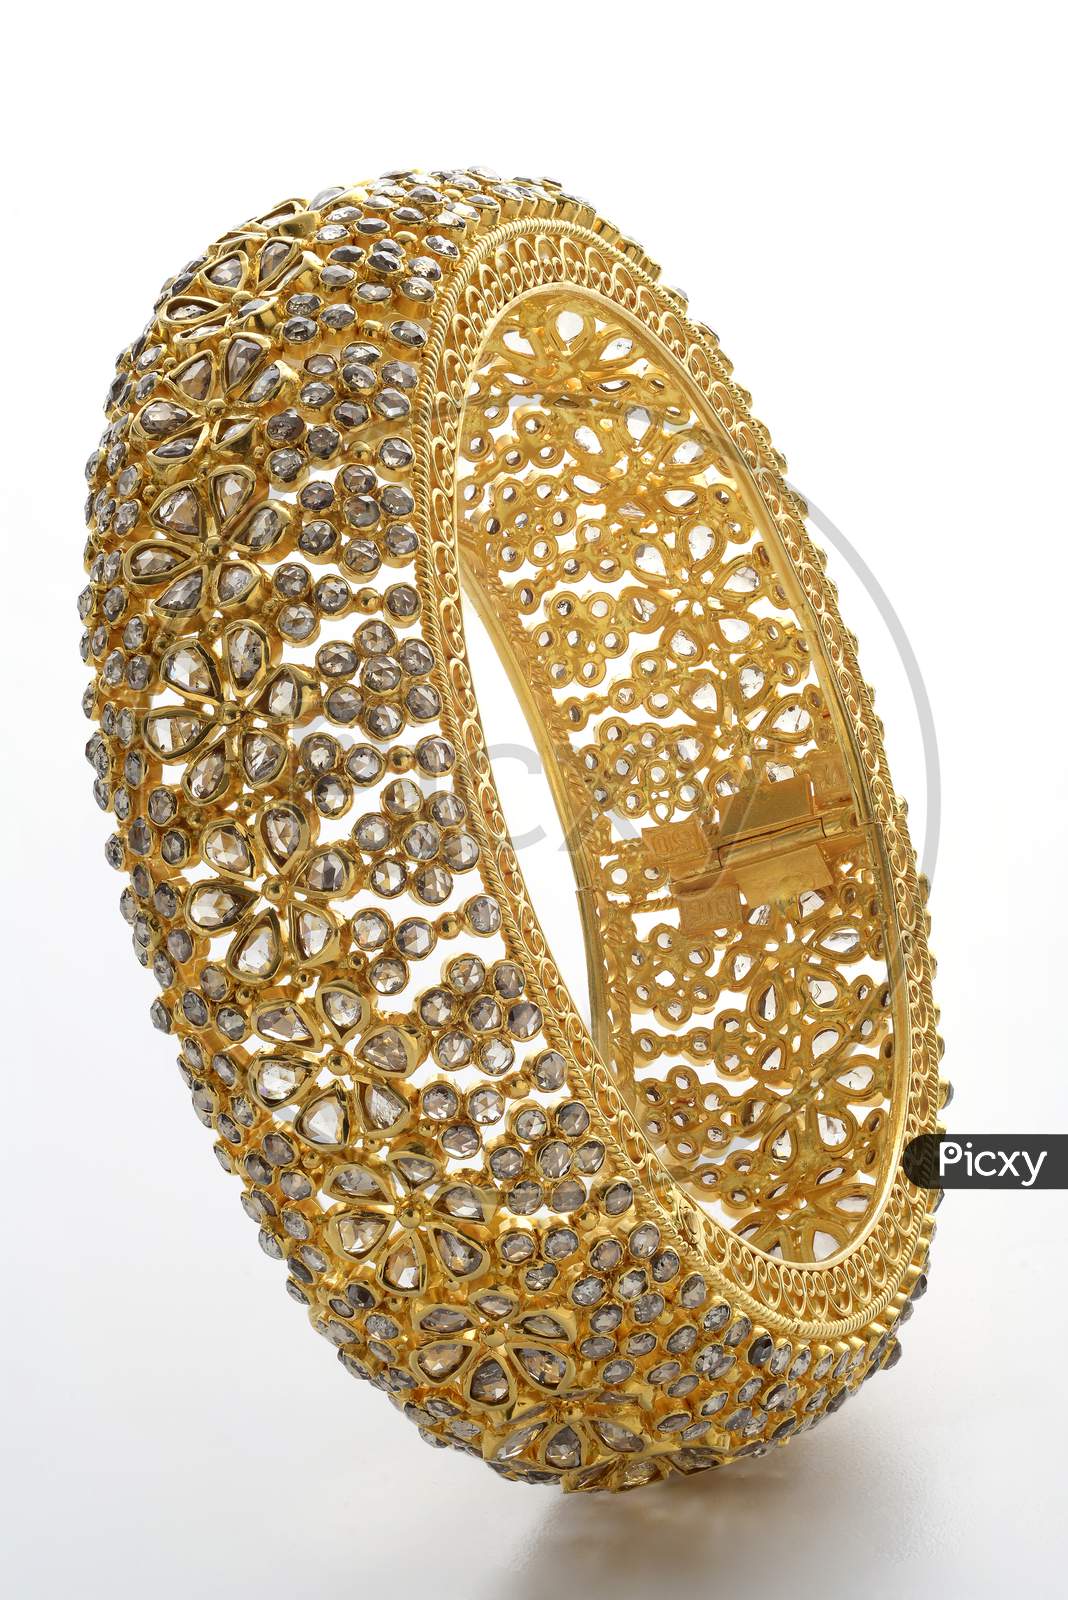 Indian Traditional Gold Bangle